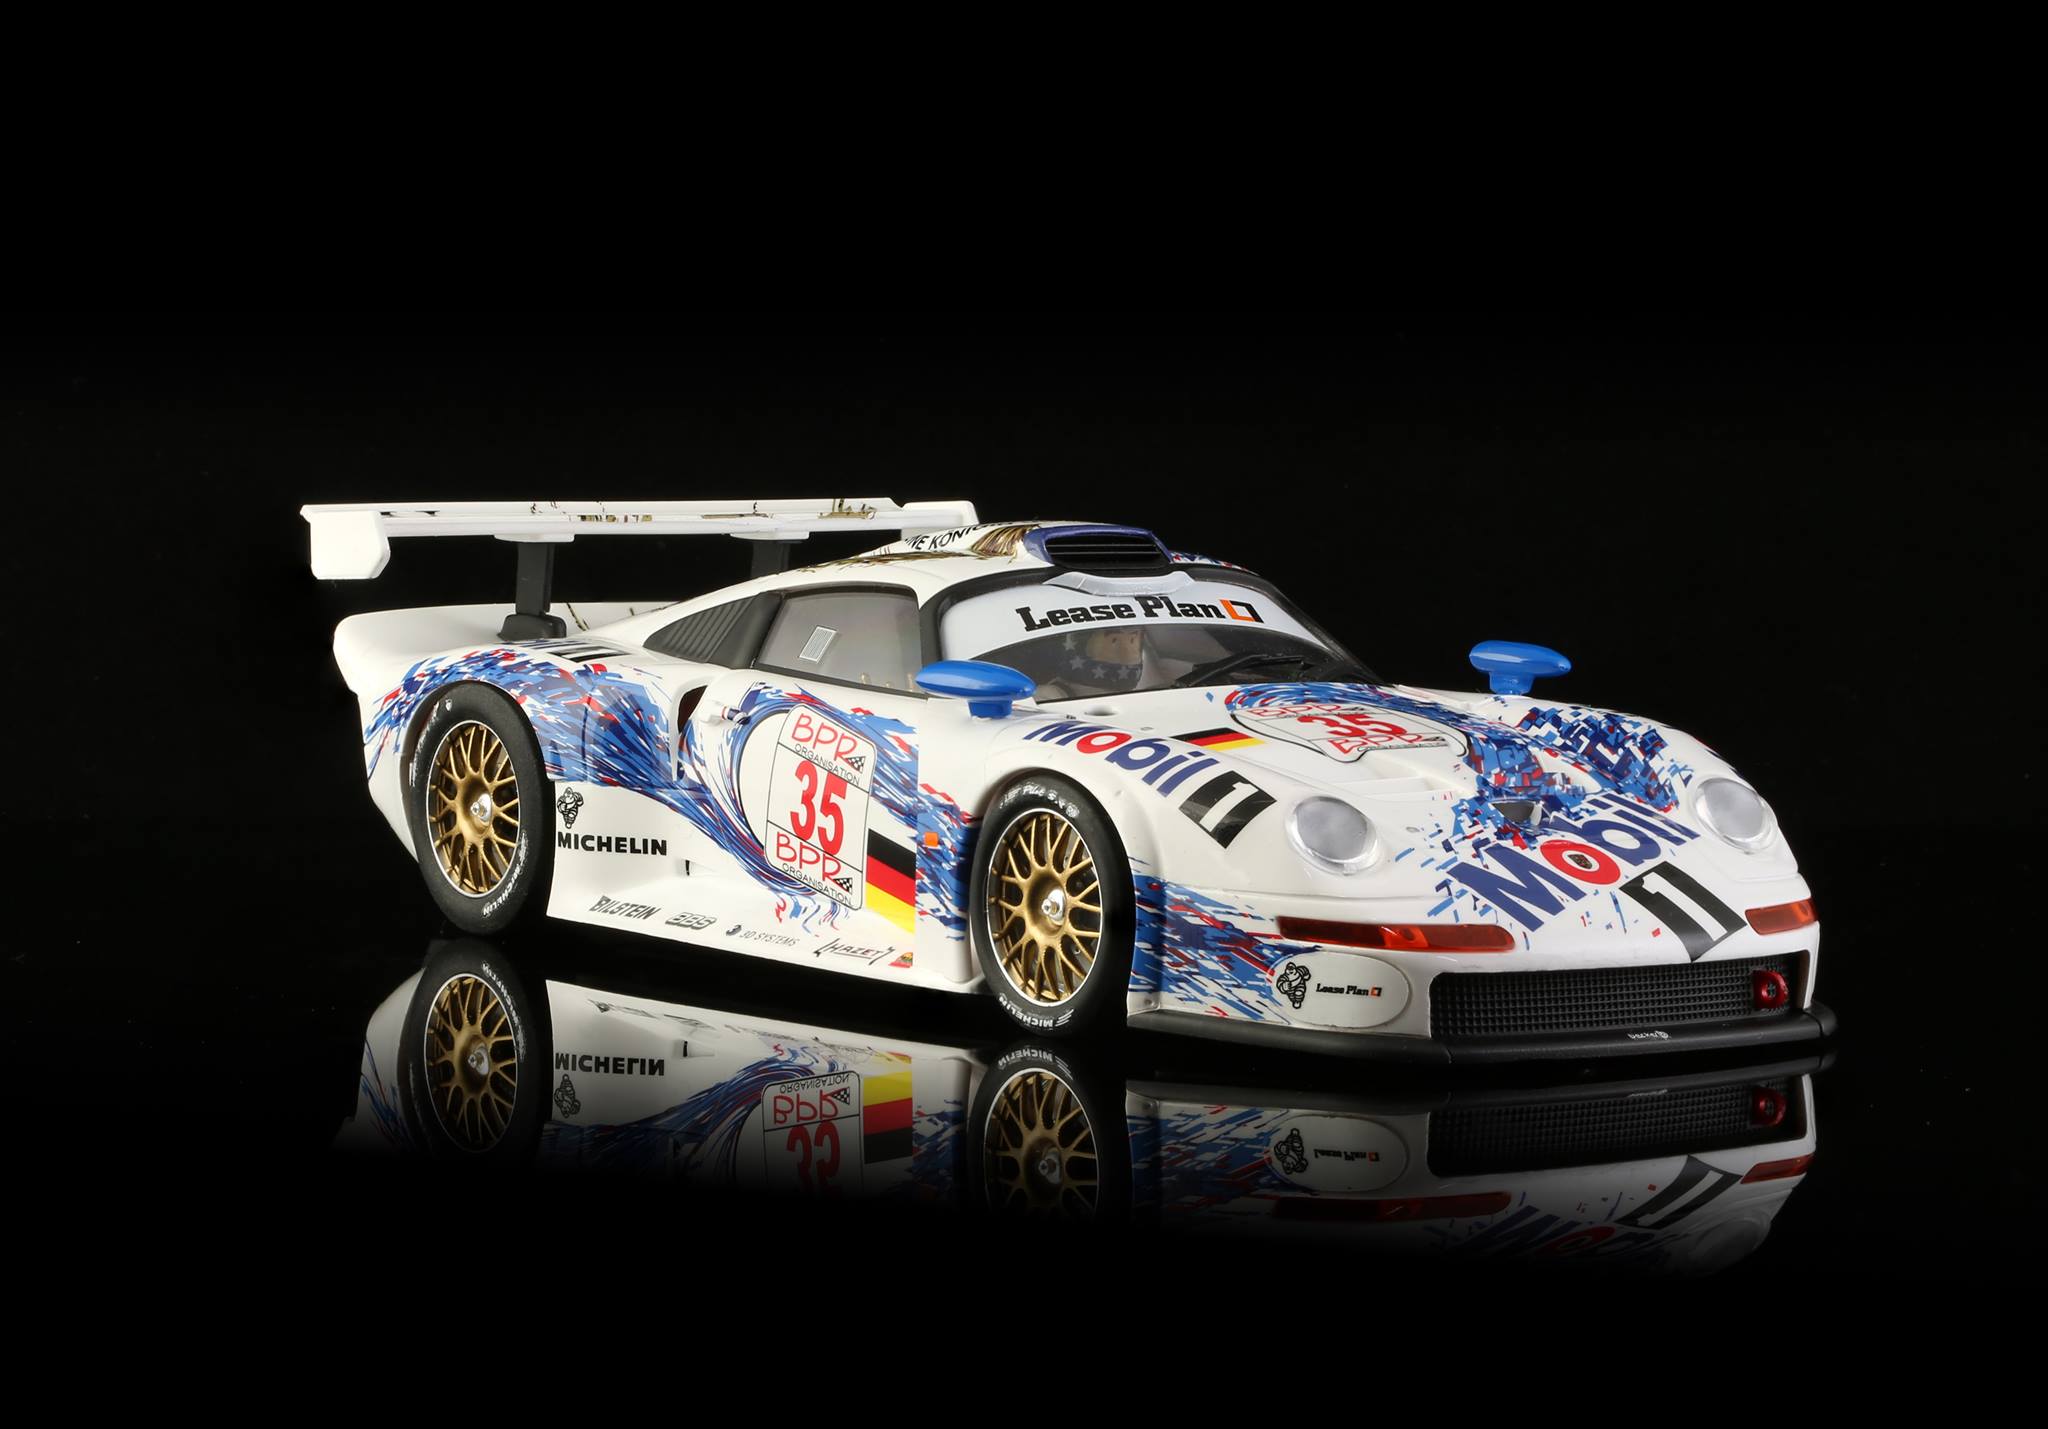 BRM045 Porsche 911 GT1 TEAM Mobil #35 with aluminum chassis